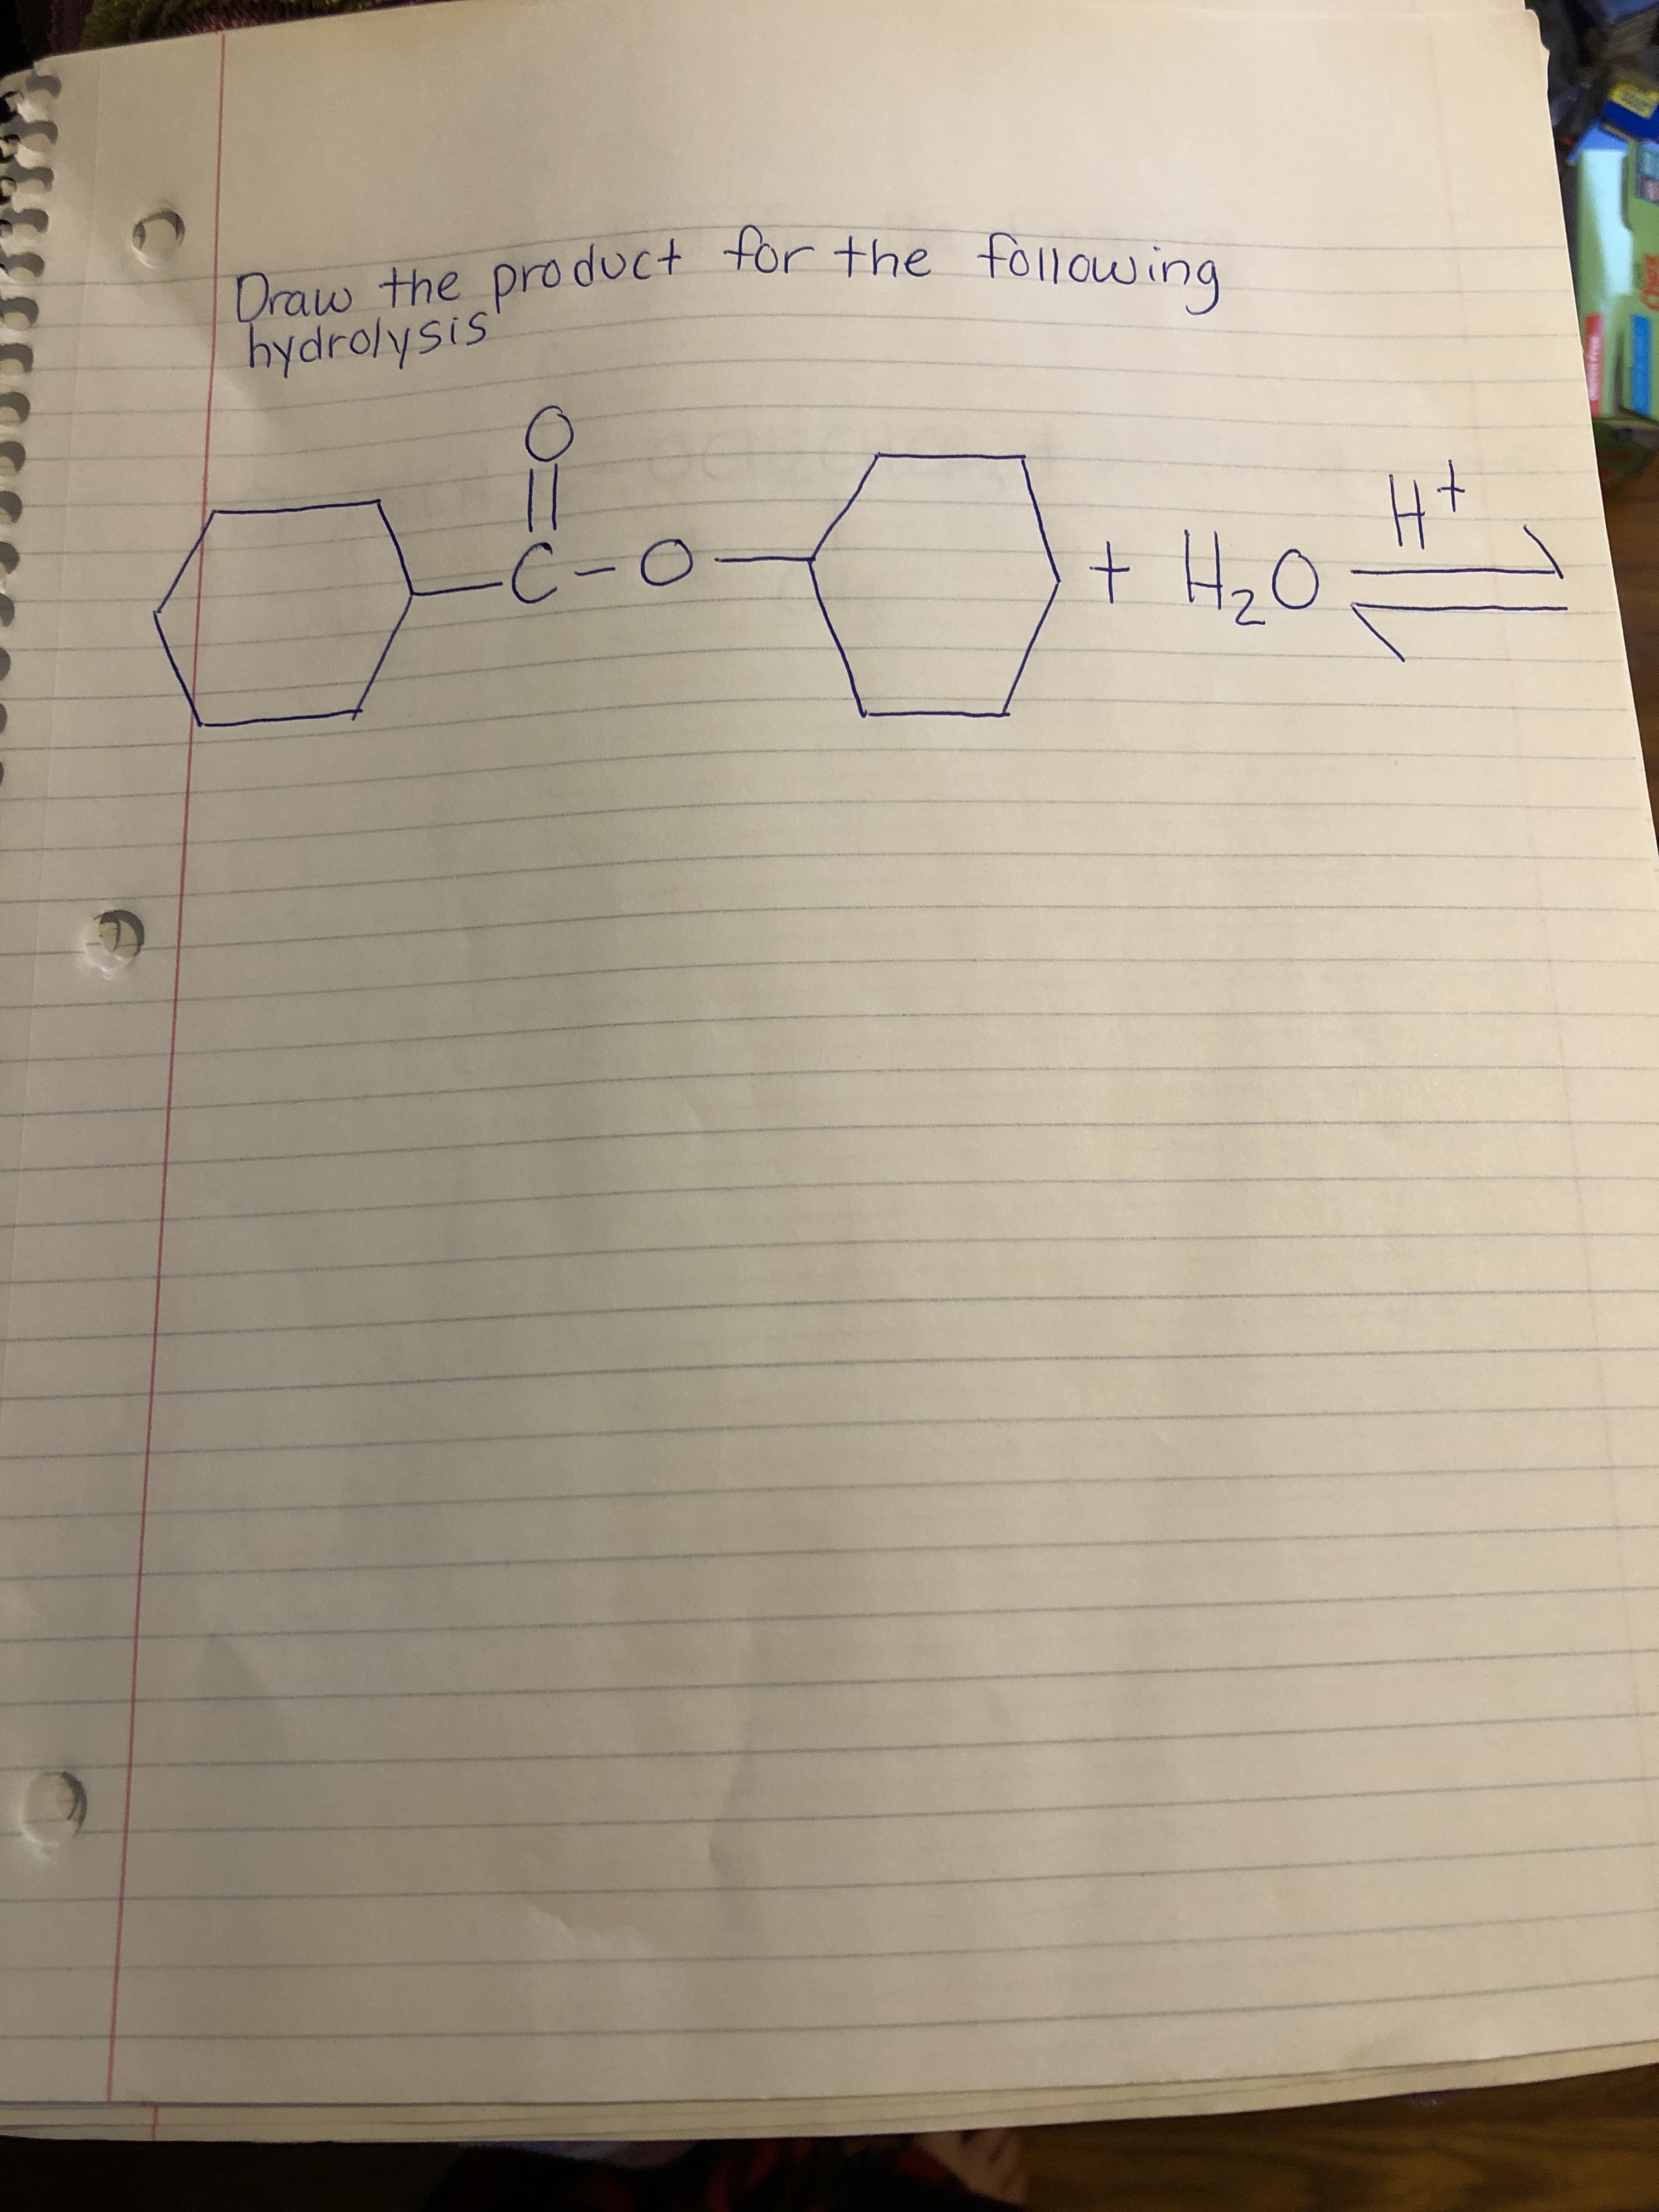 Draw the product for the tollowing
hydrolysis
Ht
+ H2O
-C-0-
ren Free
